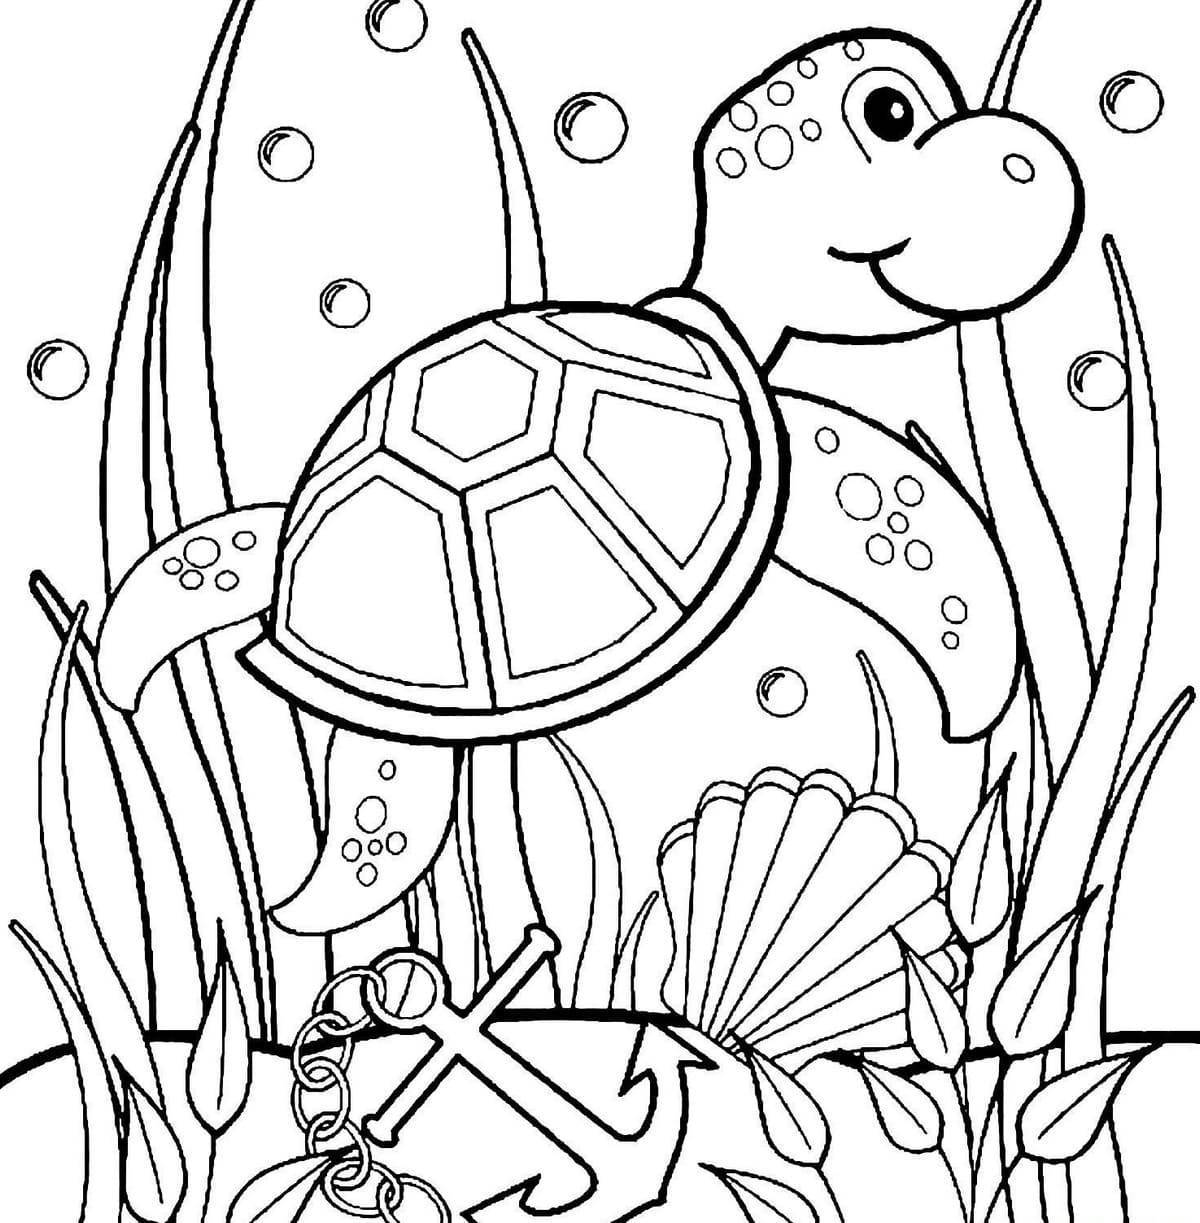 Turtle for kids #10